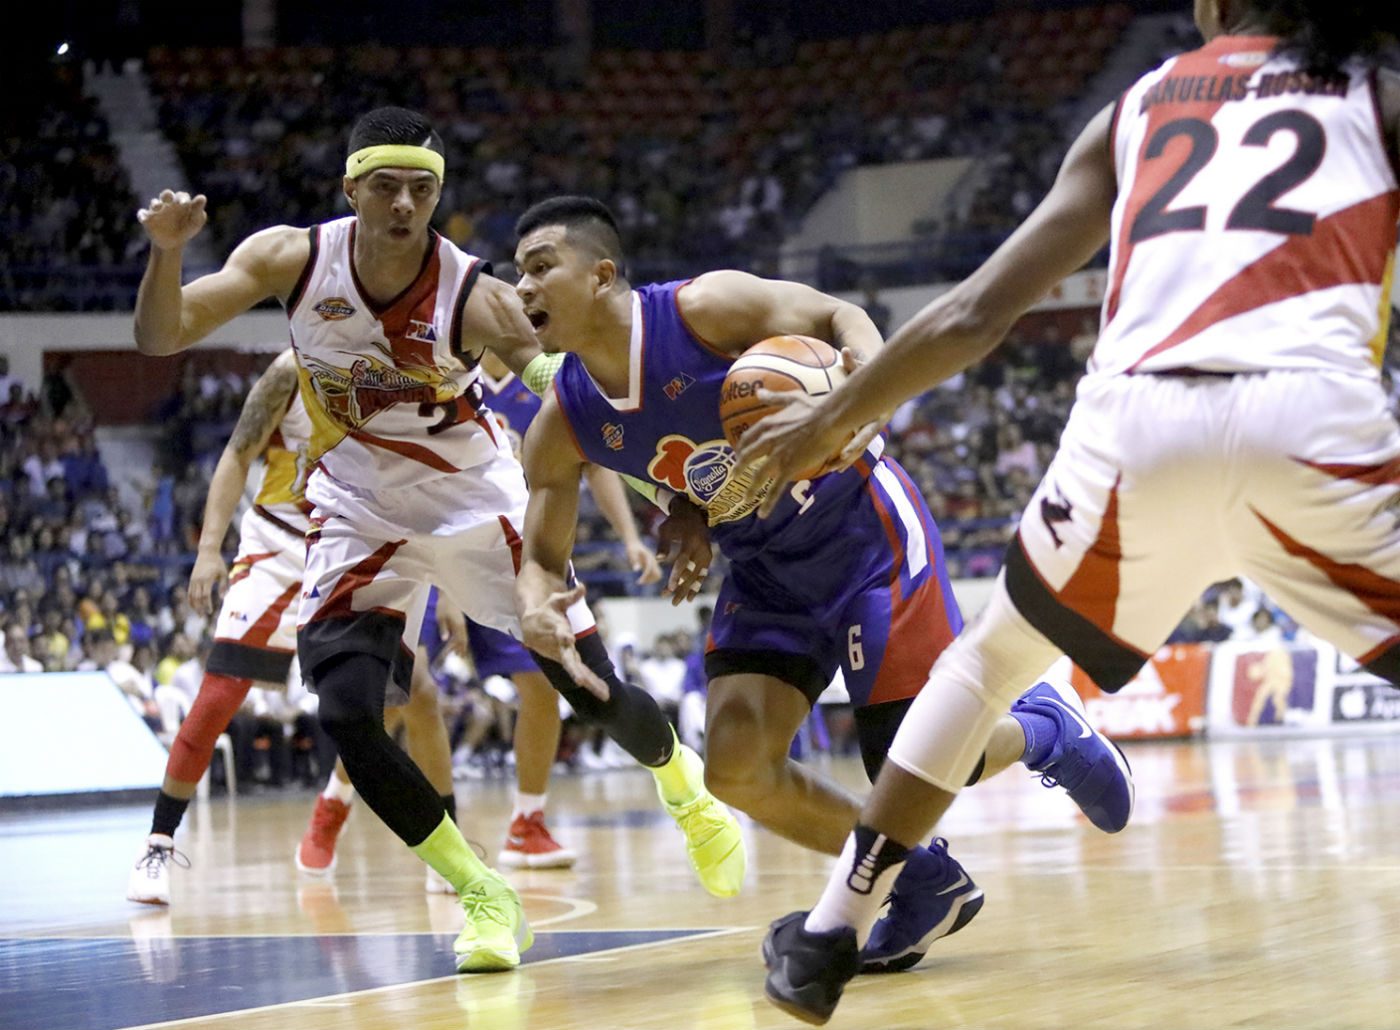 Magnolia should stop playing catch-up ball vs San Miguel, says Jalalon